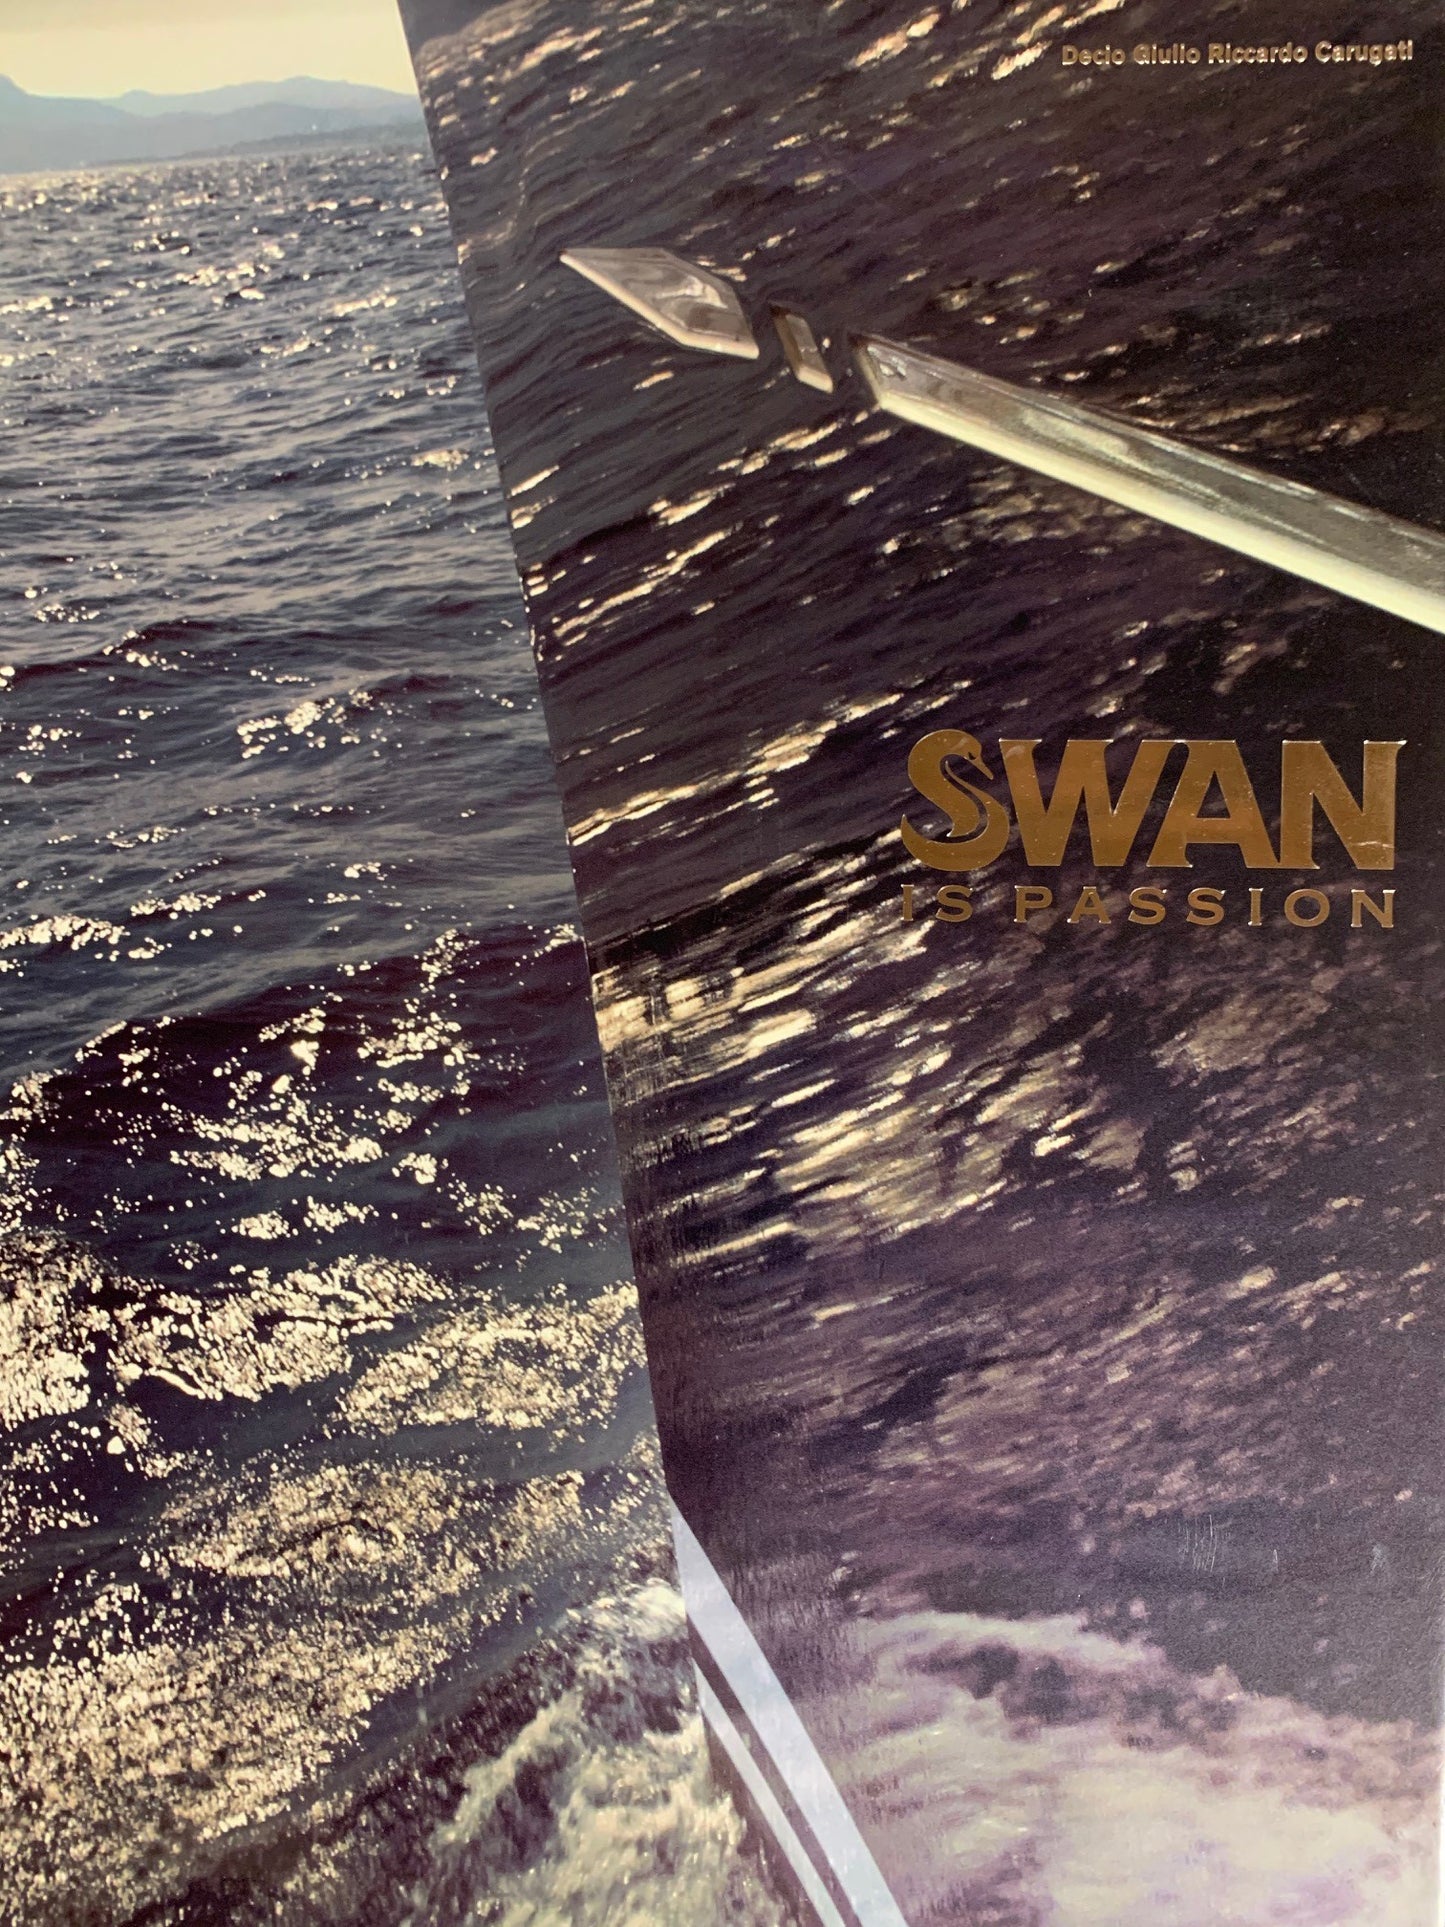 Swan is passion